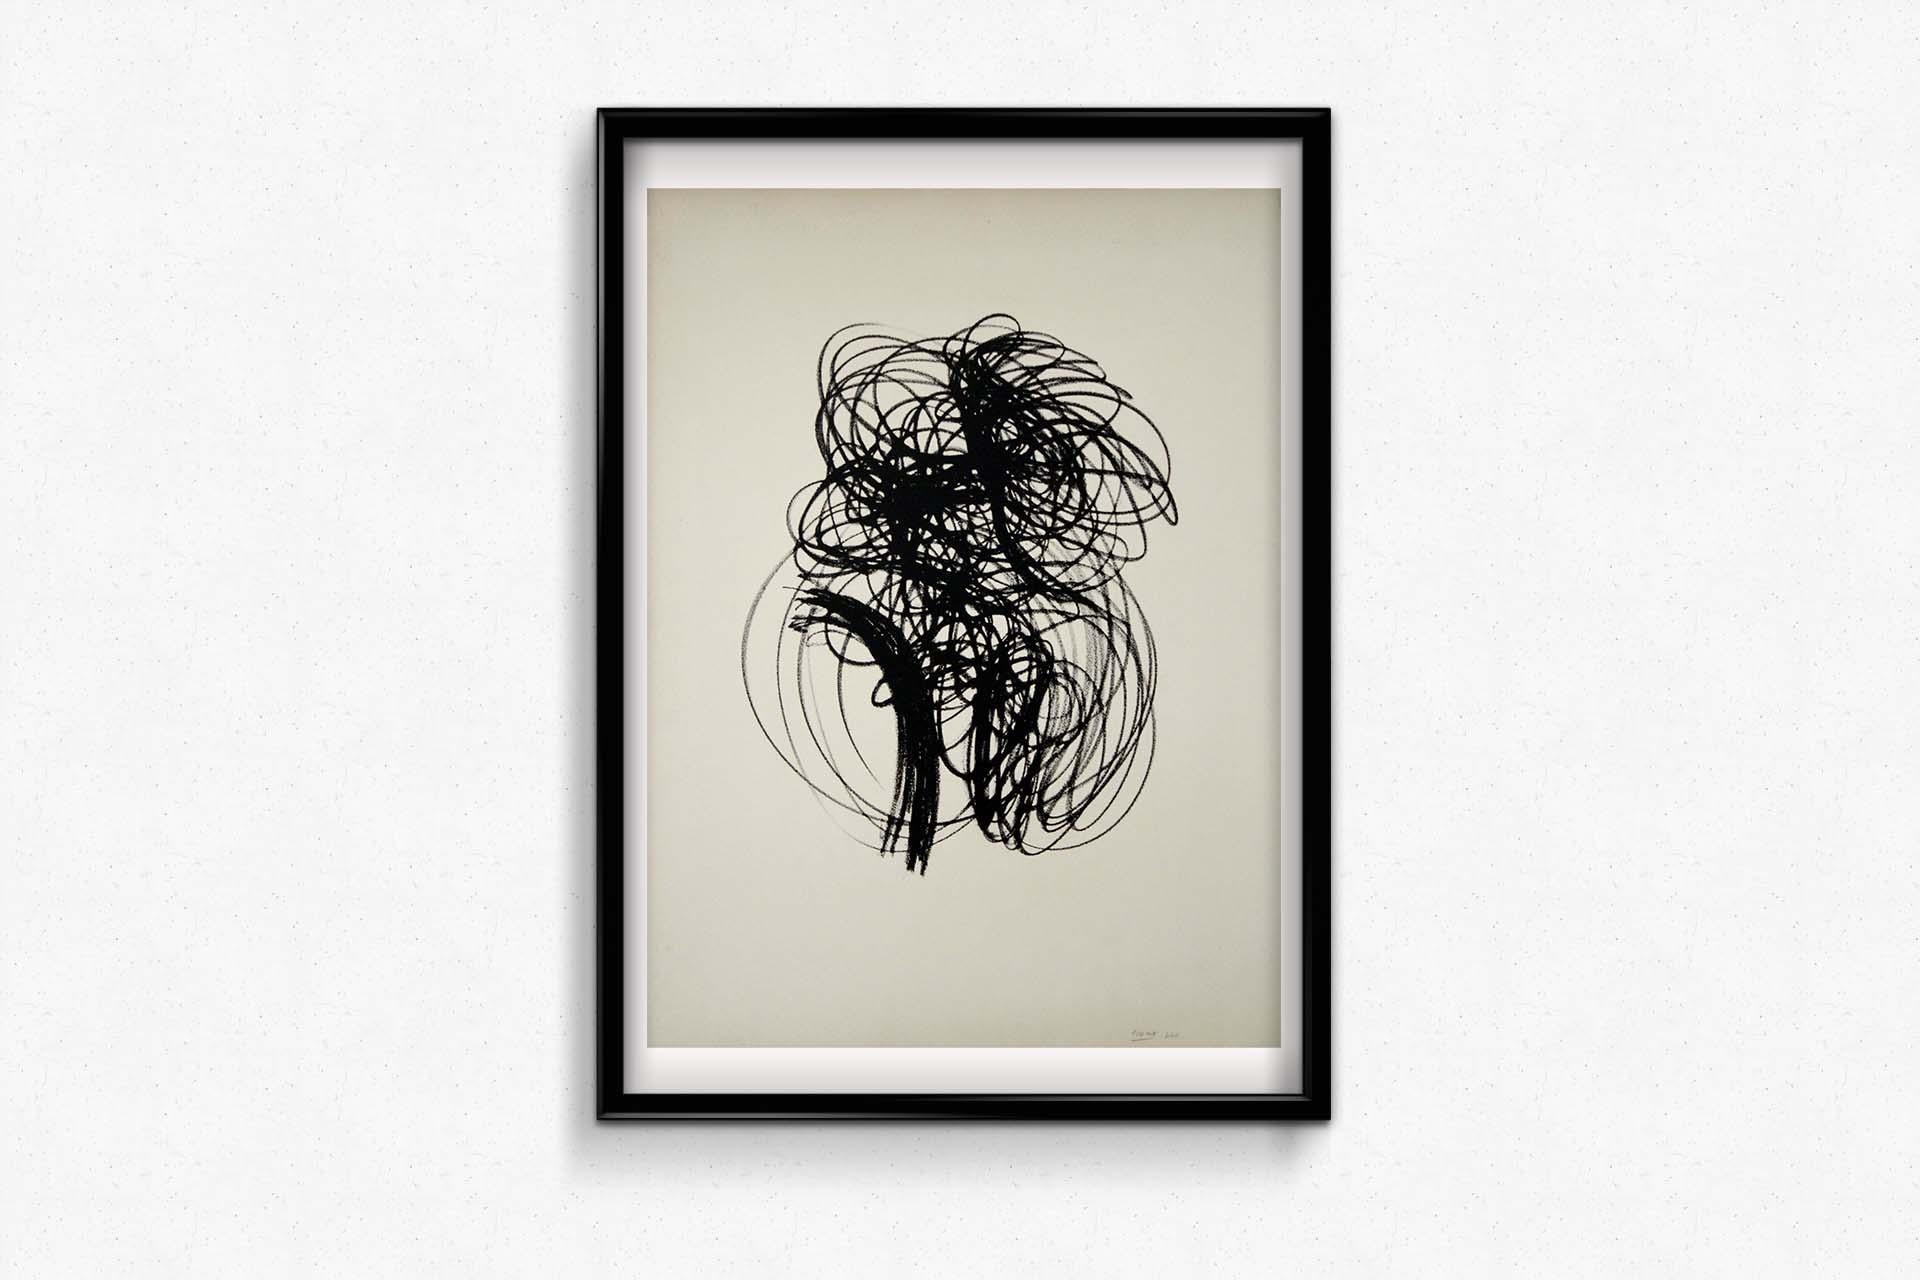 1958 original lithography by Hans Hartung L41 from the catalog raisonné For Sale 1